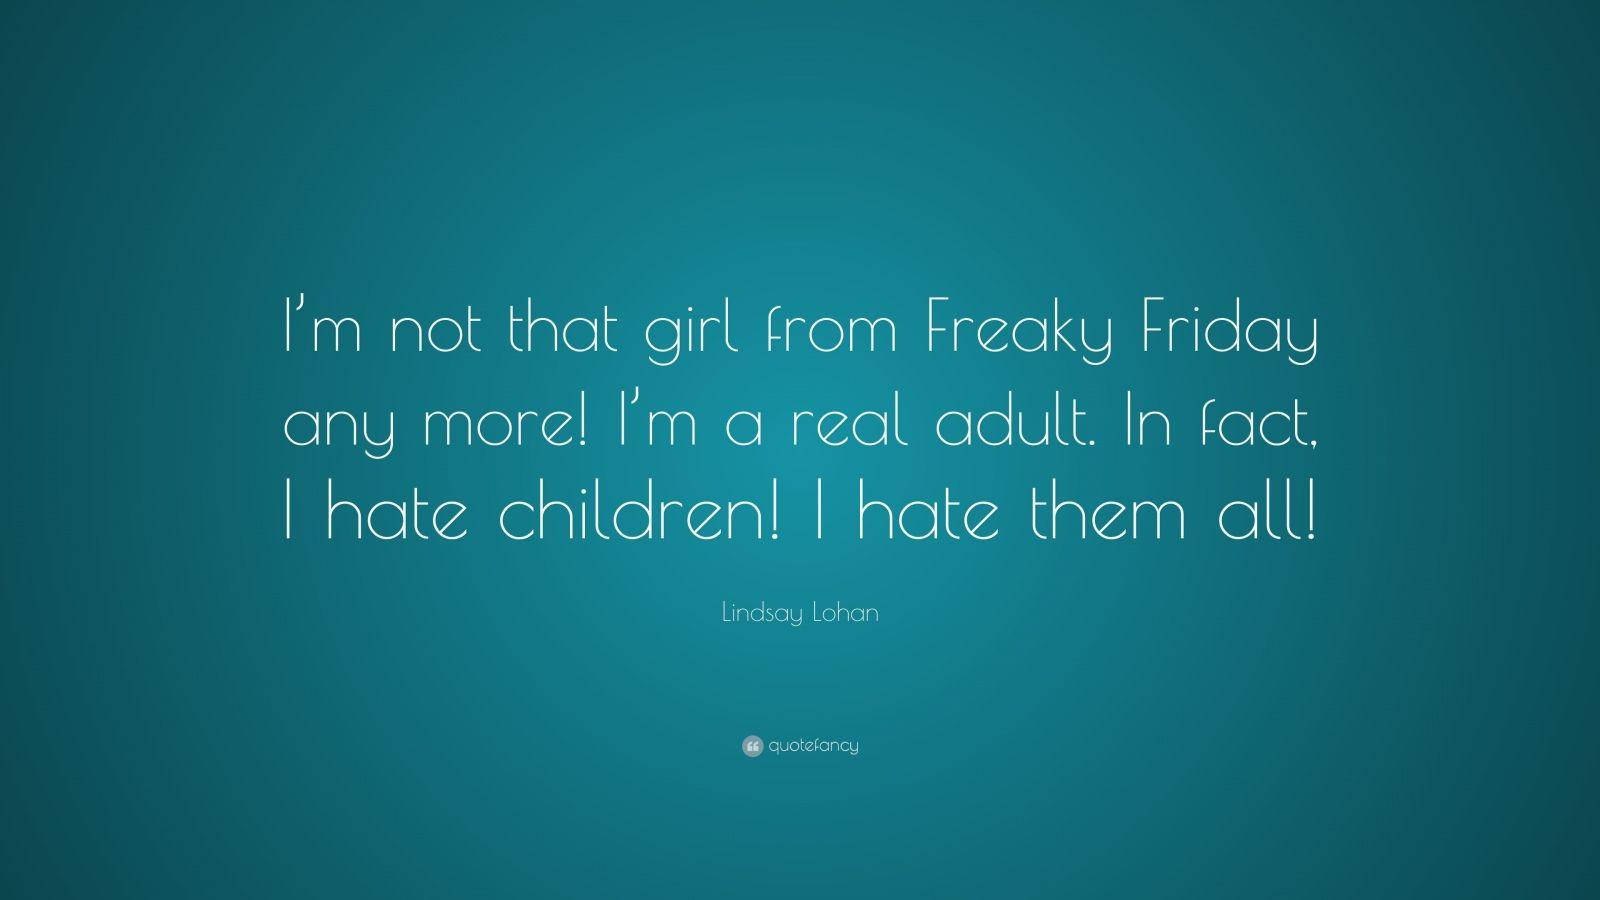 Freaky Friday Lindsay Lohan Quote On Green Background